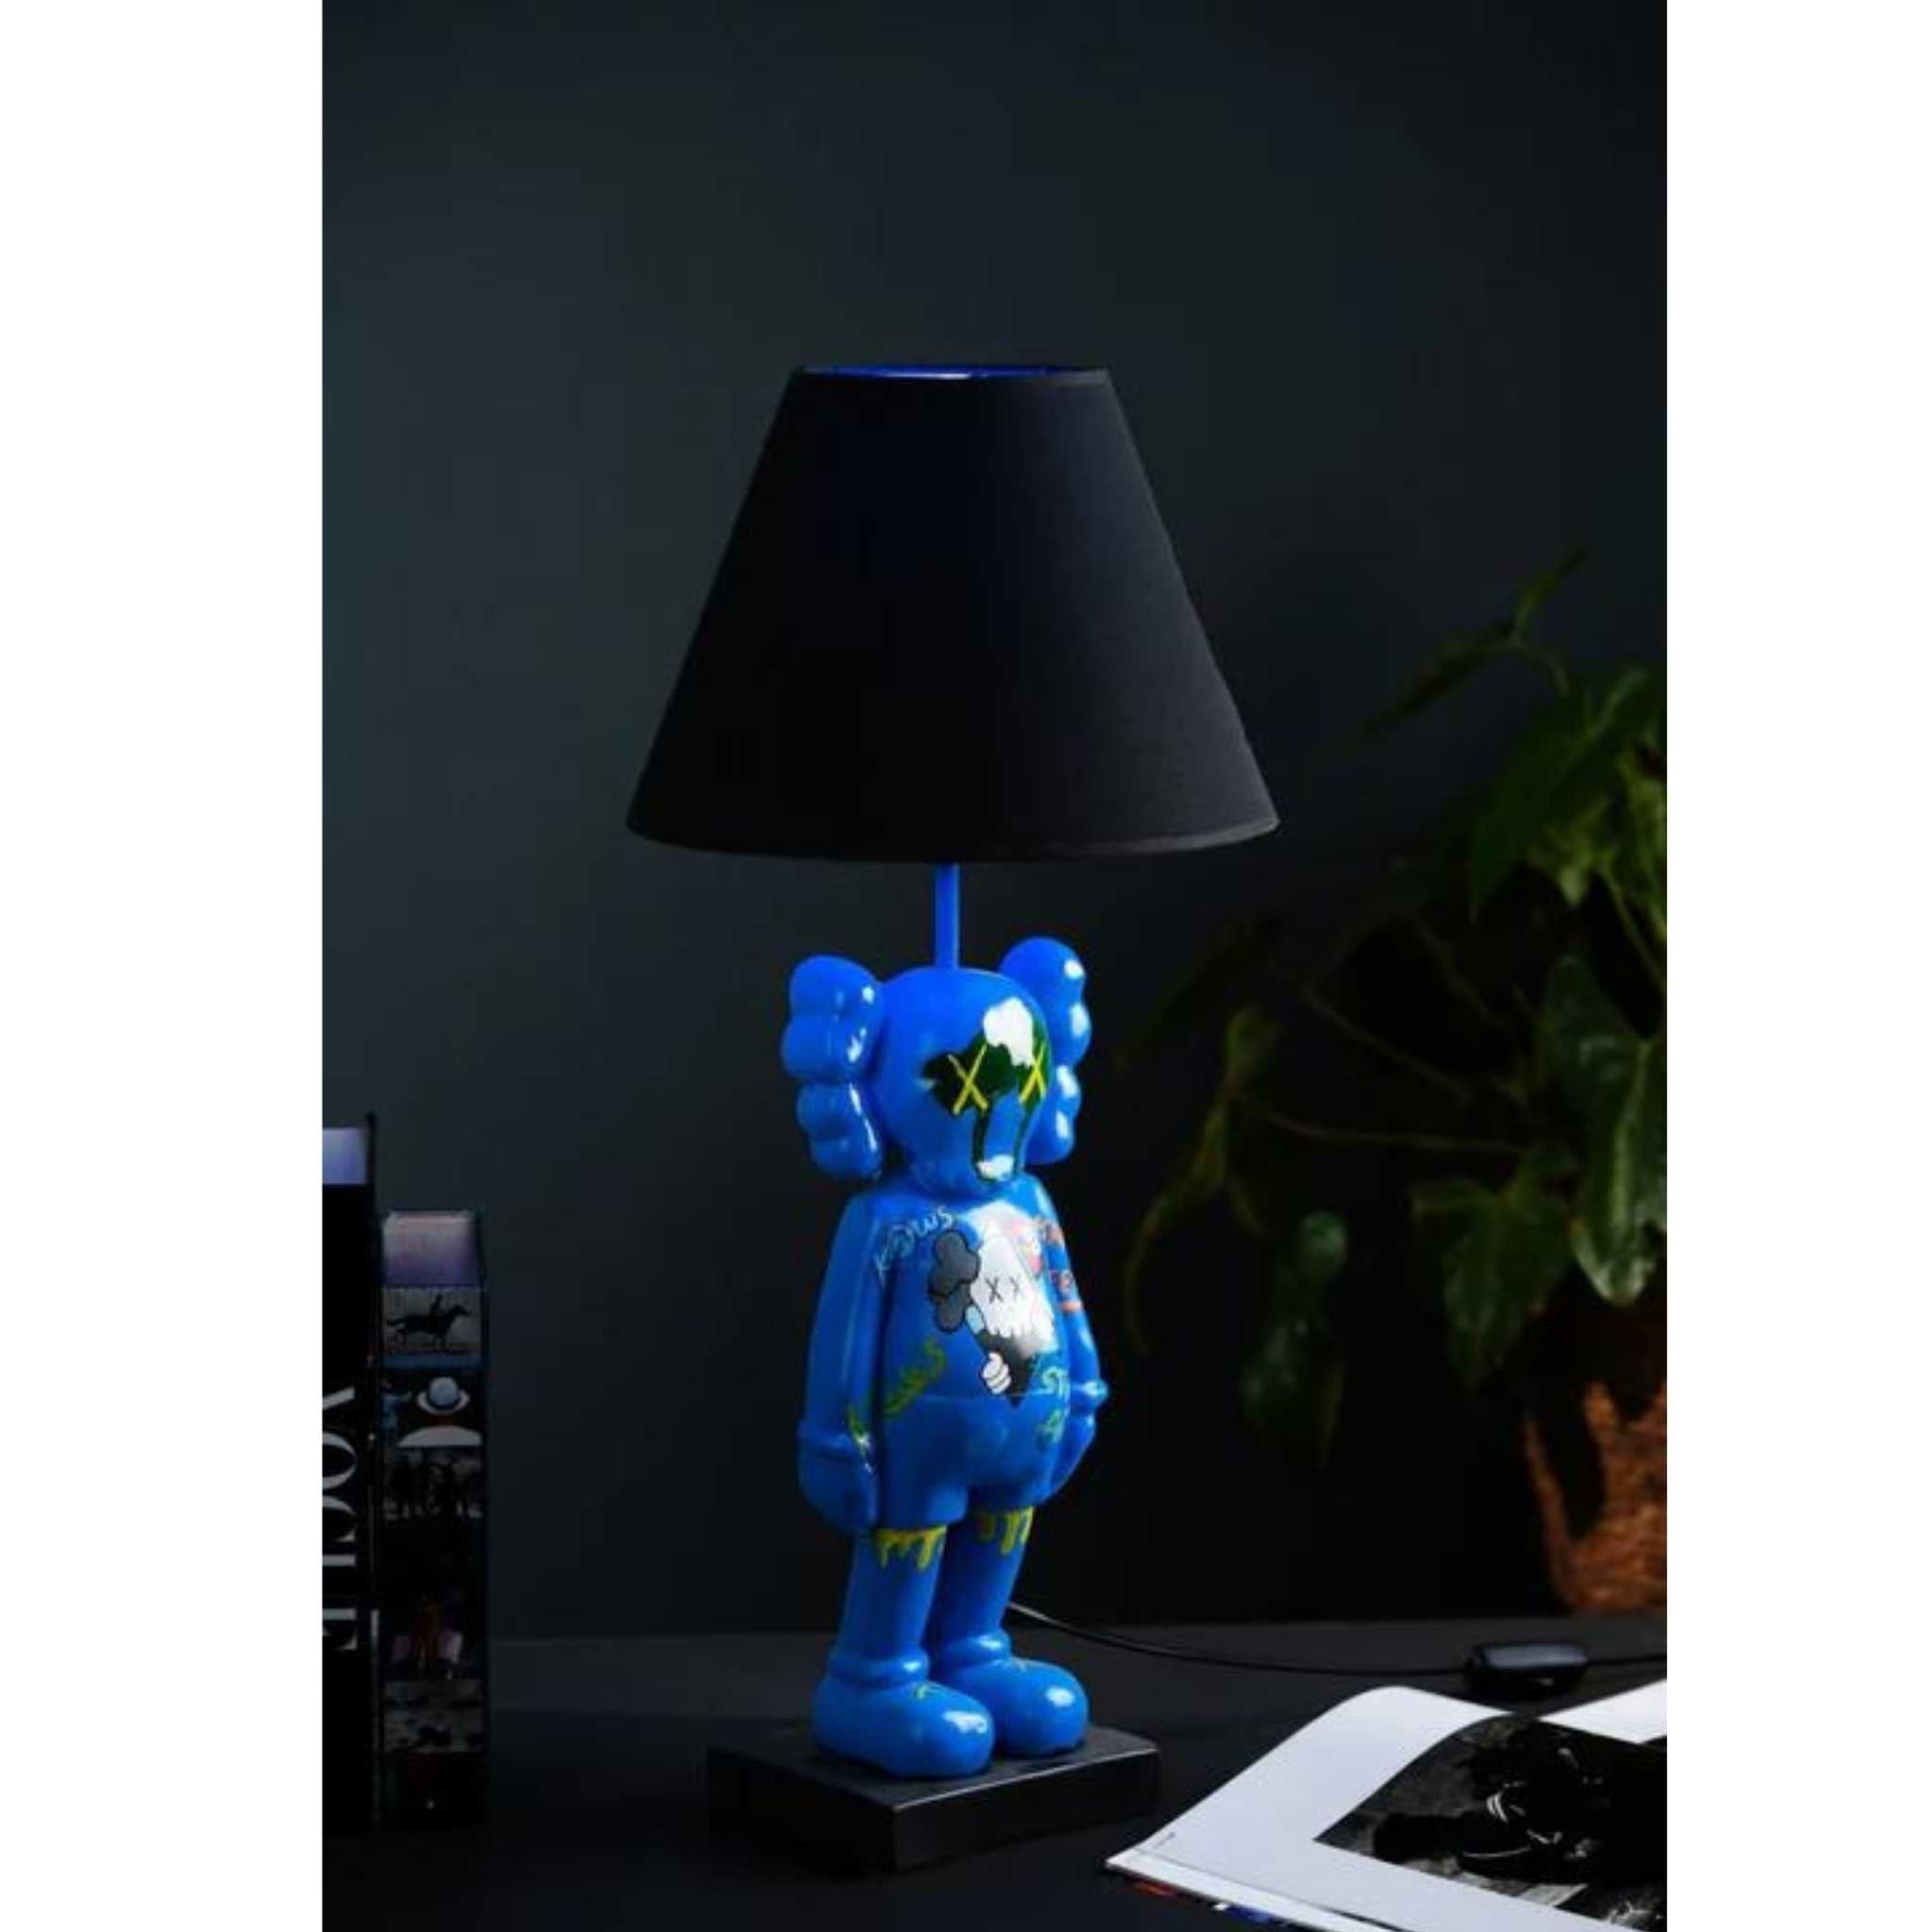 Illuminated Blue: The KAWS Sculpture with Lampshade